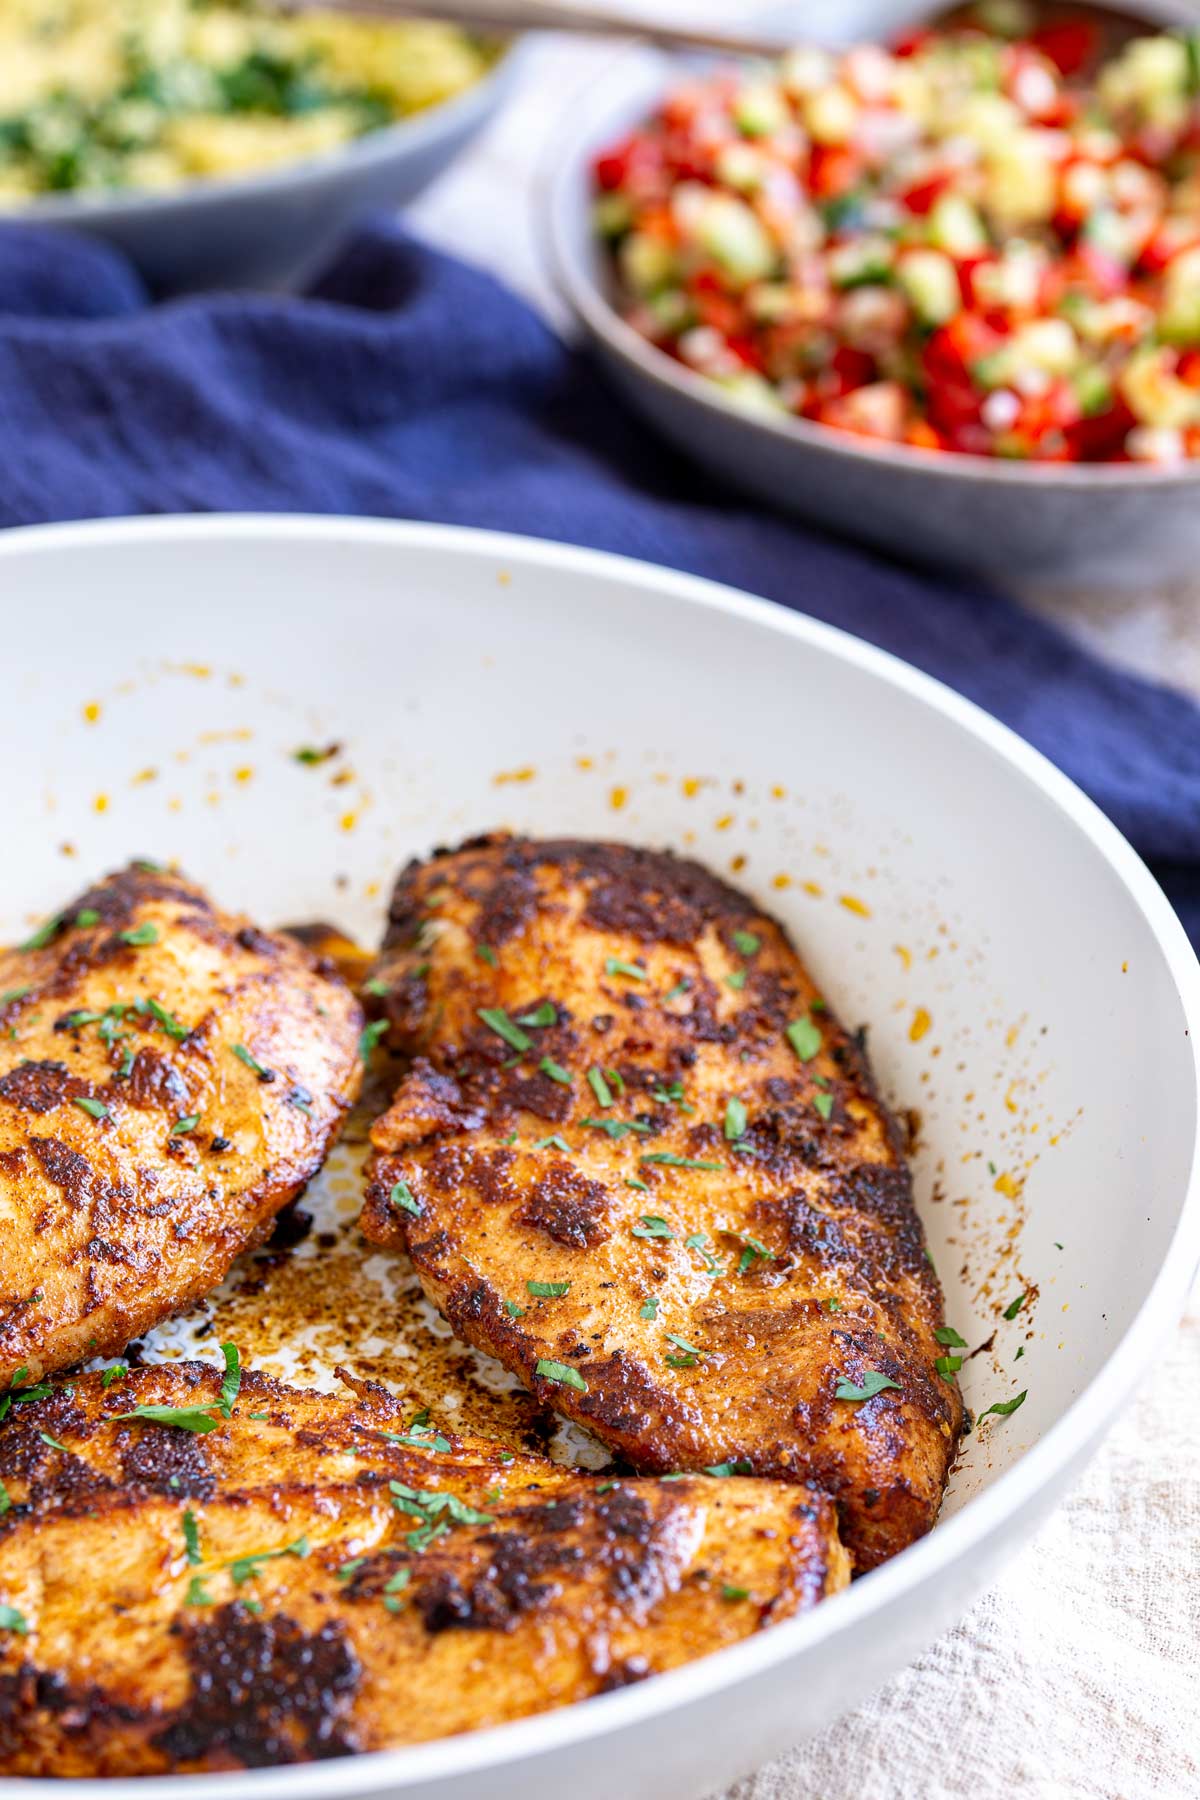 thin cooked chicken breasts coated with moroccan spices